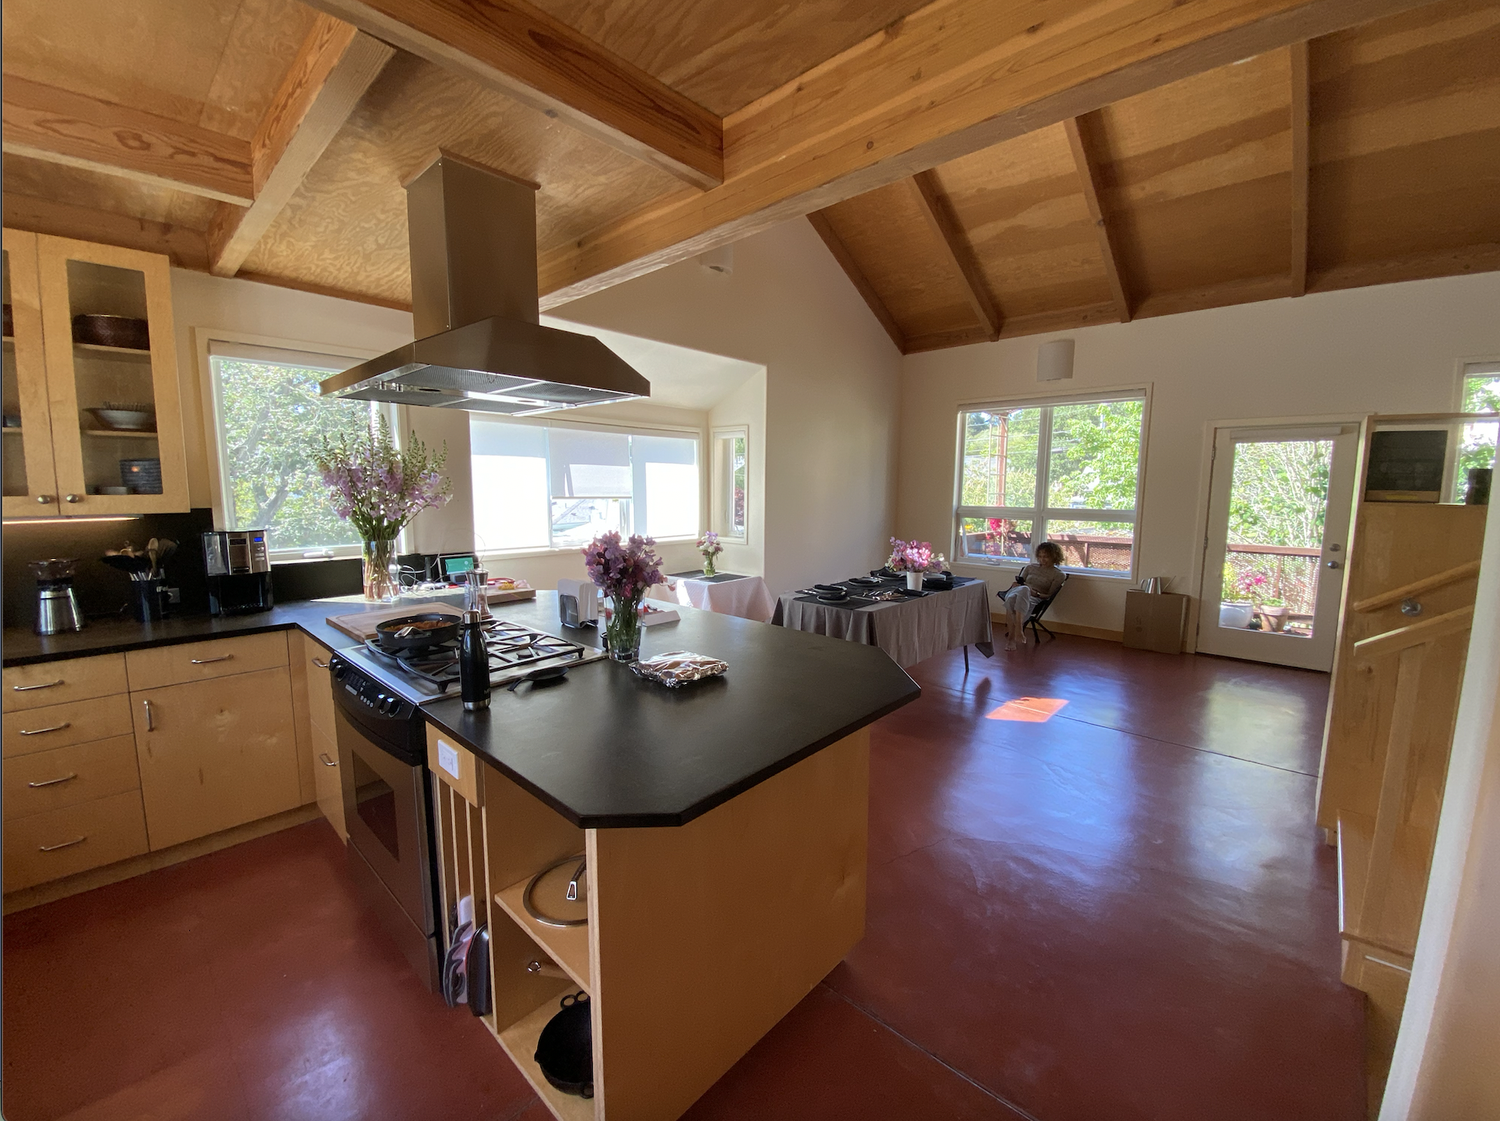  An open kitchen and living space. The space is separated by a countertop with black surface, oven, and wooden cabinets. There is a hanging range vent, red concrete floors, and large windows on two walls.  